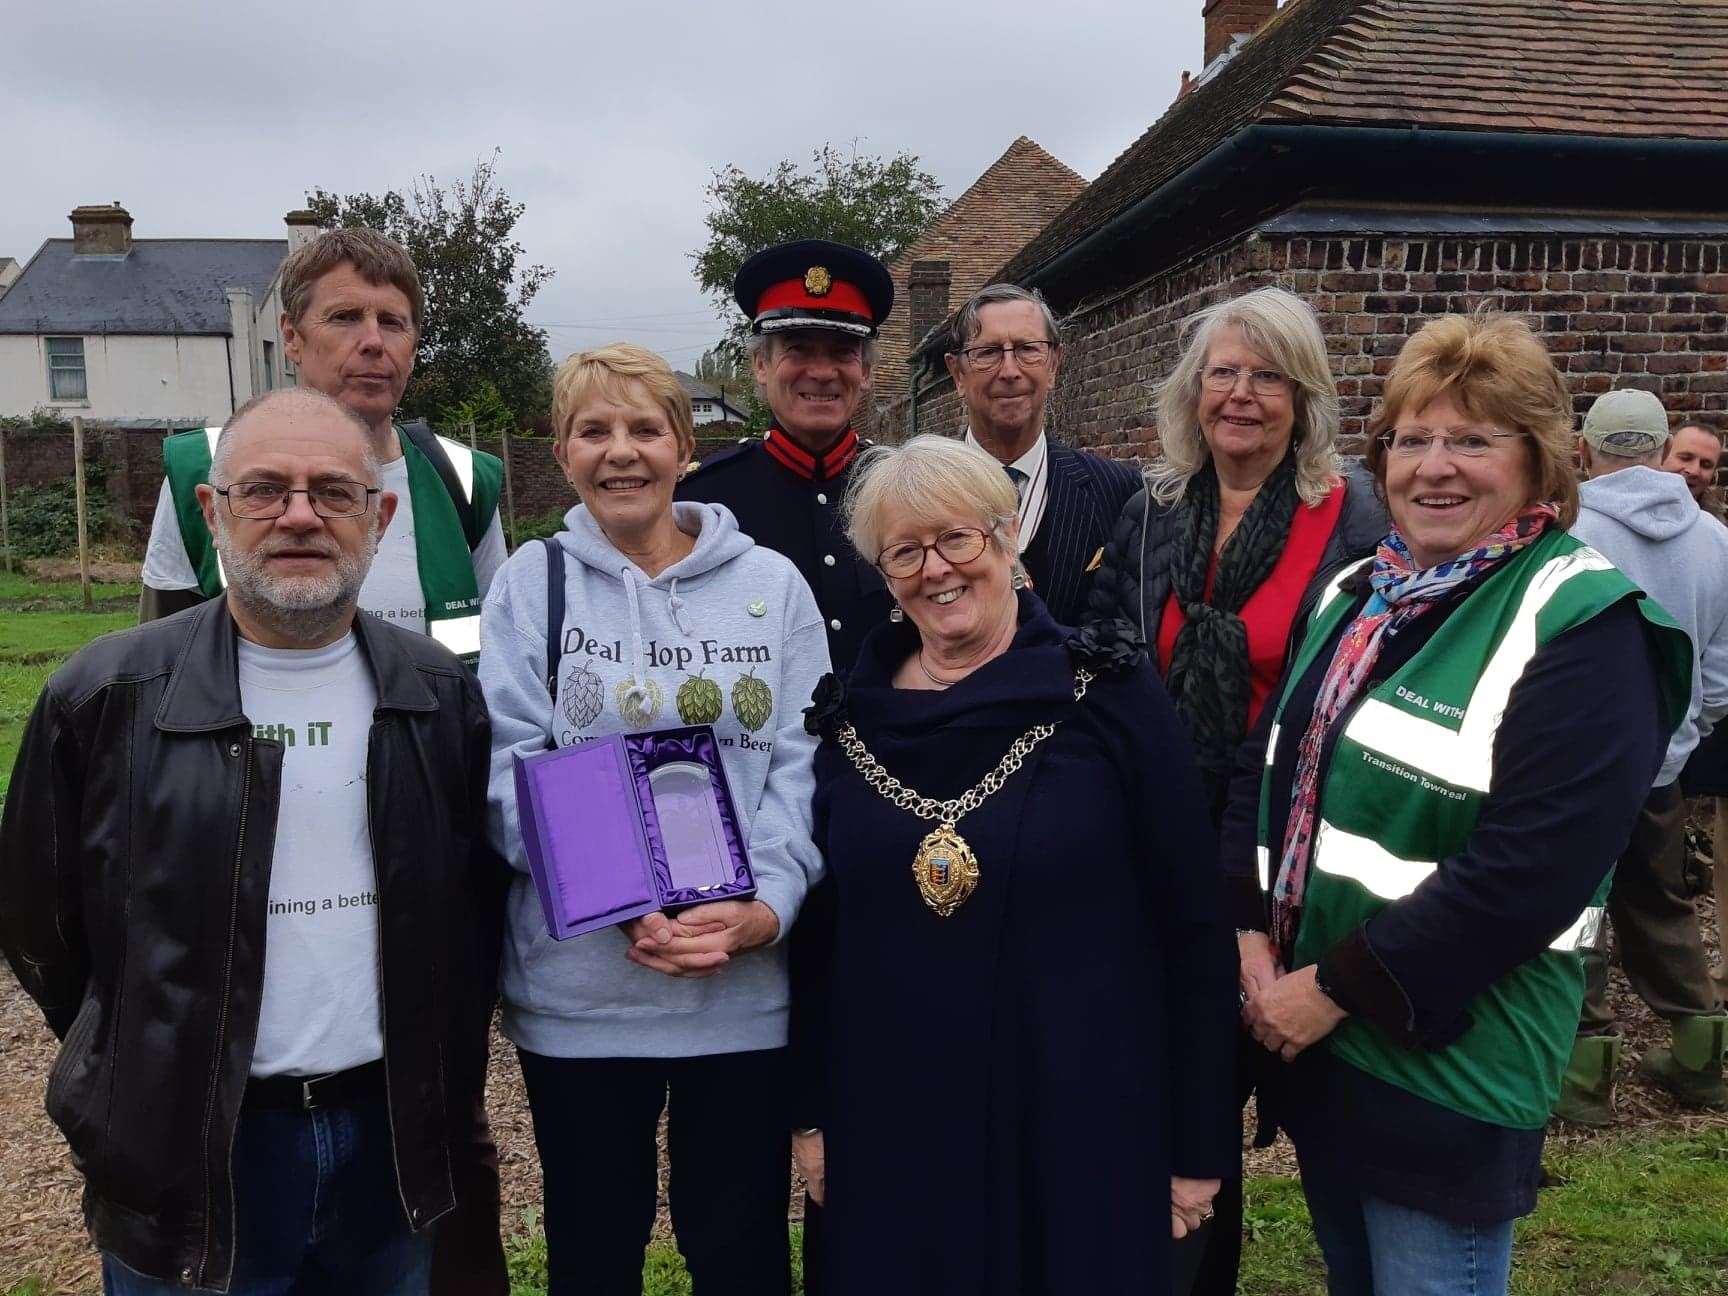 Founding members Charles Franklin, Stephen Wakeford, Vicki Nicholls, Eileen Rowbotham, Rosie Rechter and Jane Stubbington with Vice Lord Lieutenant of Kent Richard Oldfield OBE and Col Jo Gunnell